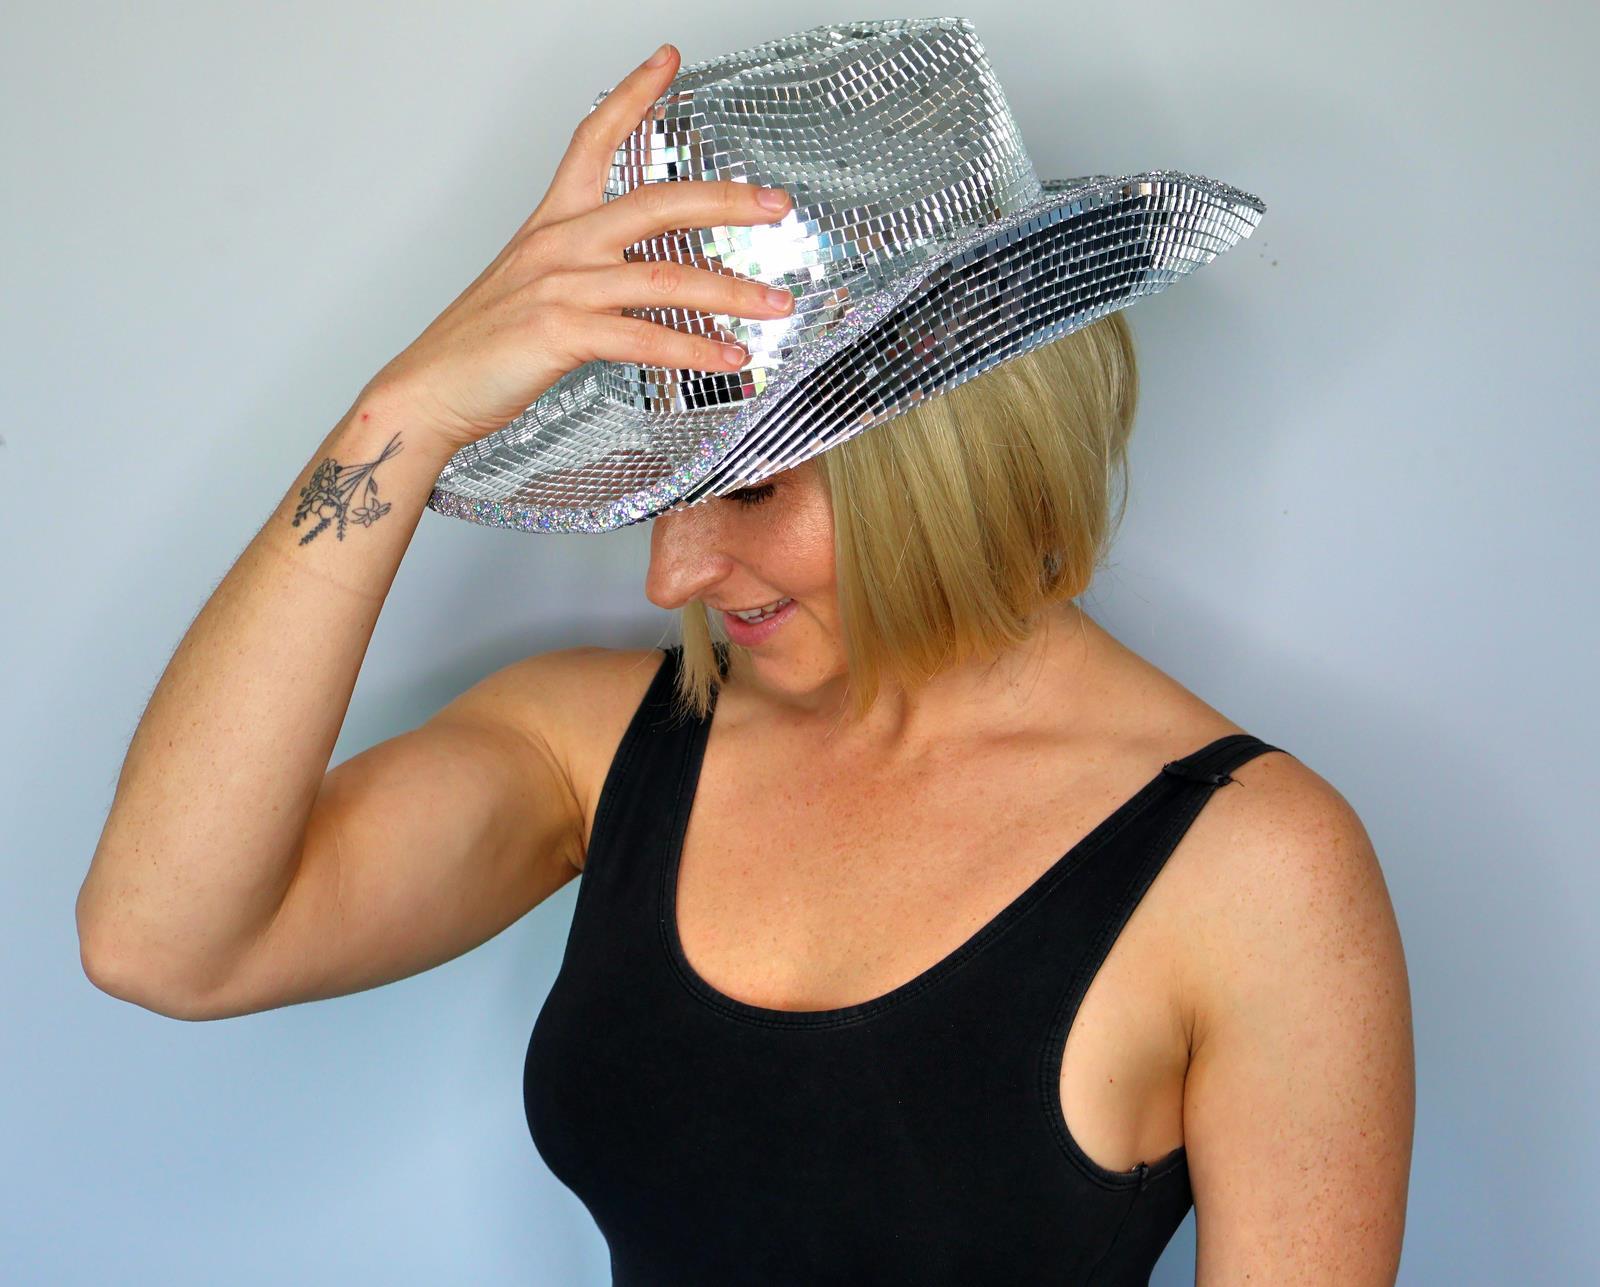 Hat Cowboy/Cowgirl Disco 1970s Mirror Ball Silver Super Deluxe